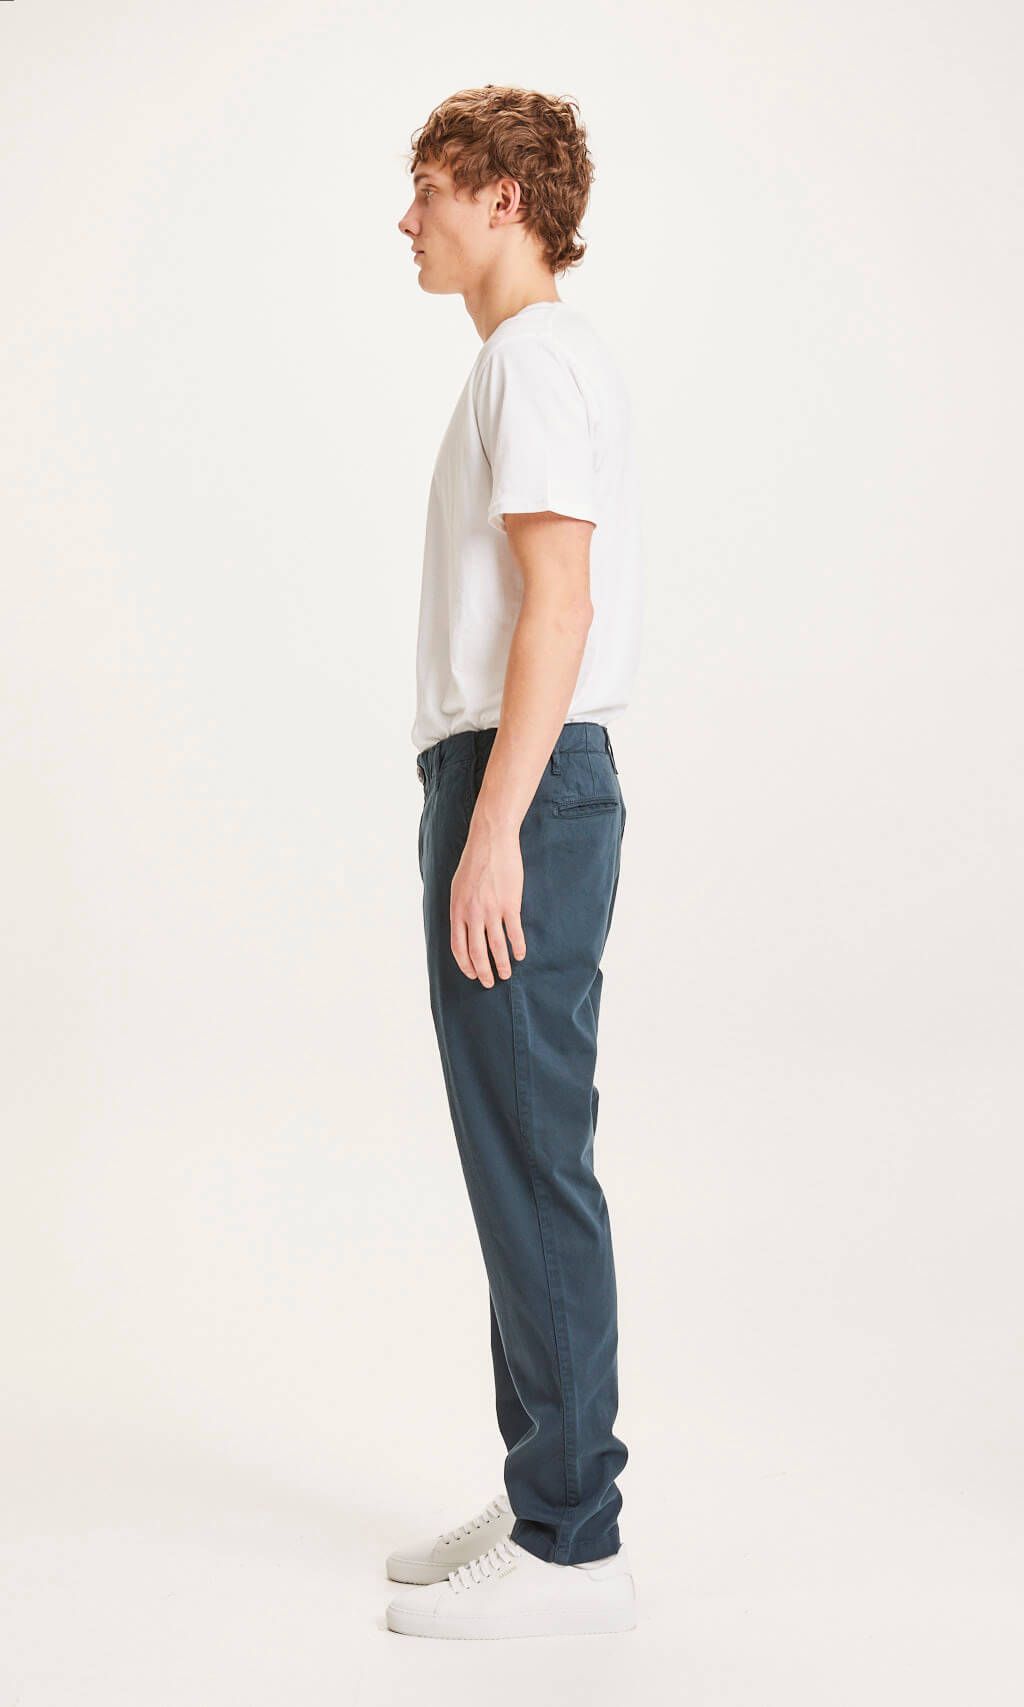 Chuck Regular Stretched Chino Pant Total Eclipse 30/32